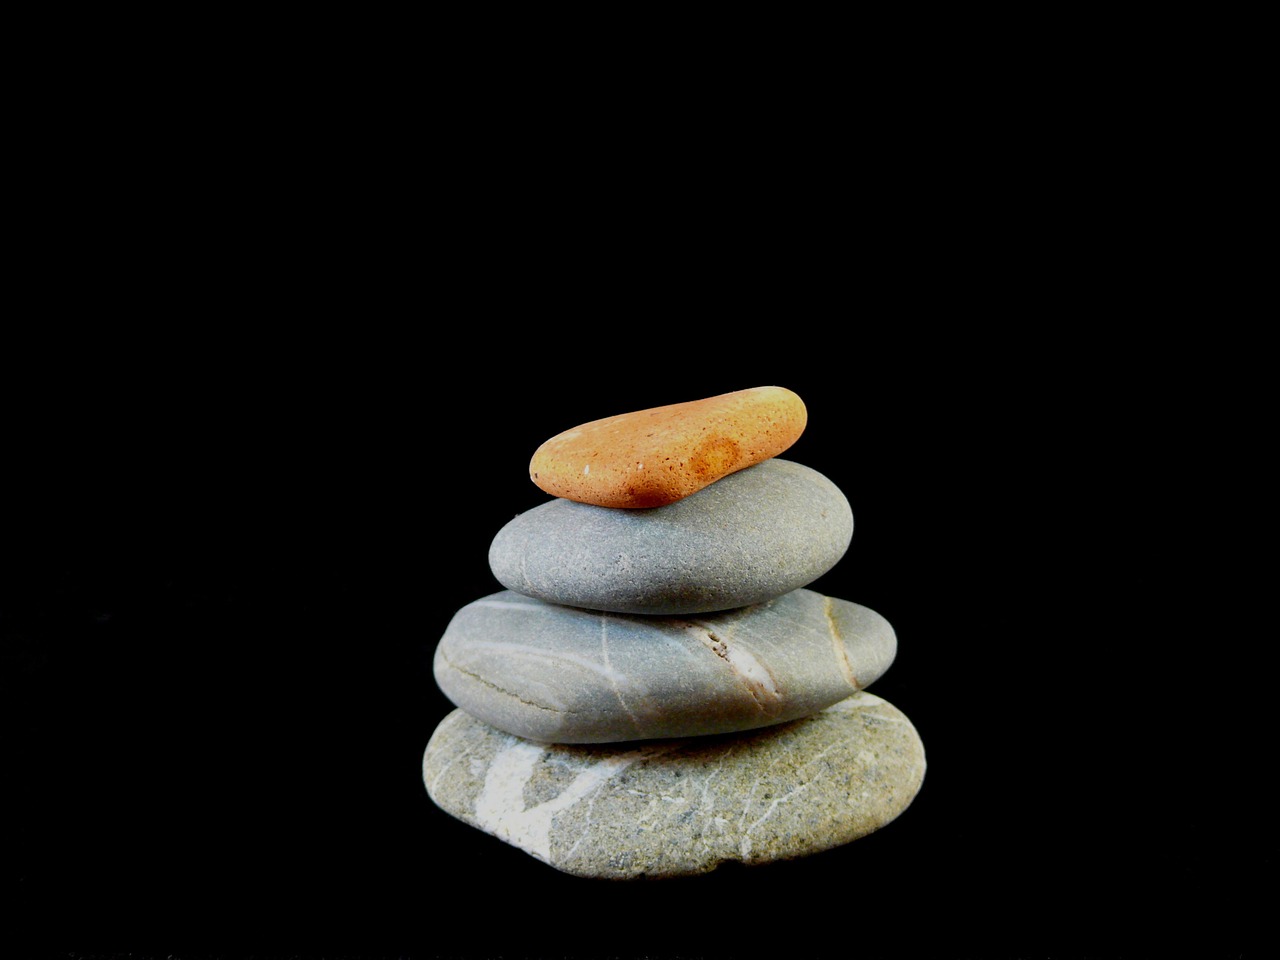 a stack of rocks sitting on top of each other, minimalism, 2000s photo, on black background, woodstock, miniature product photo